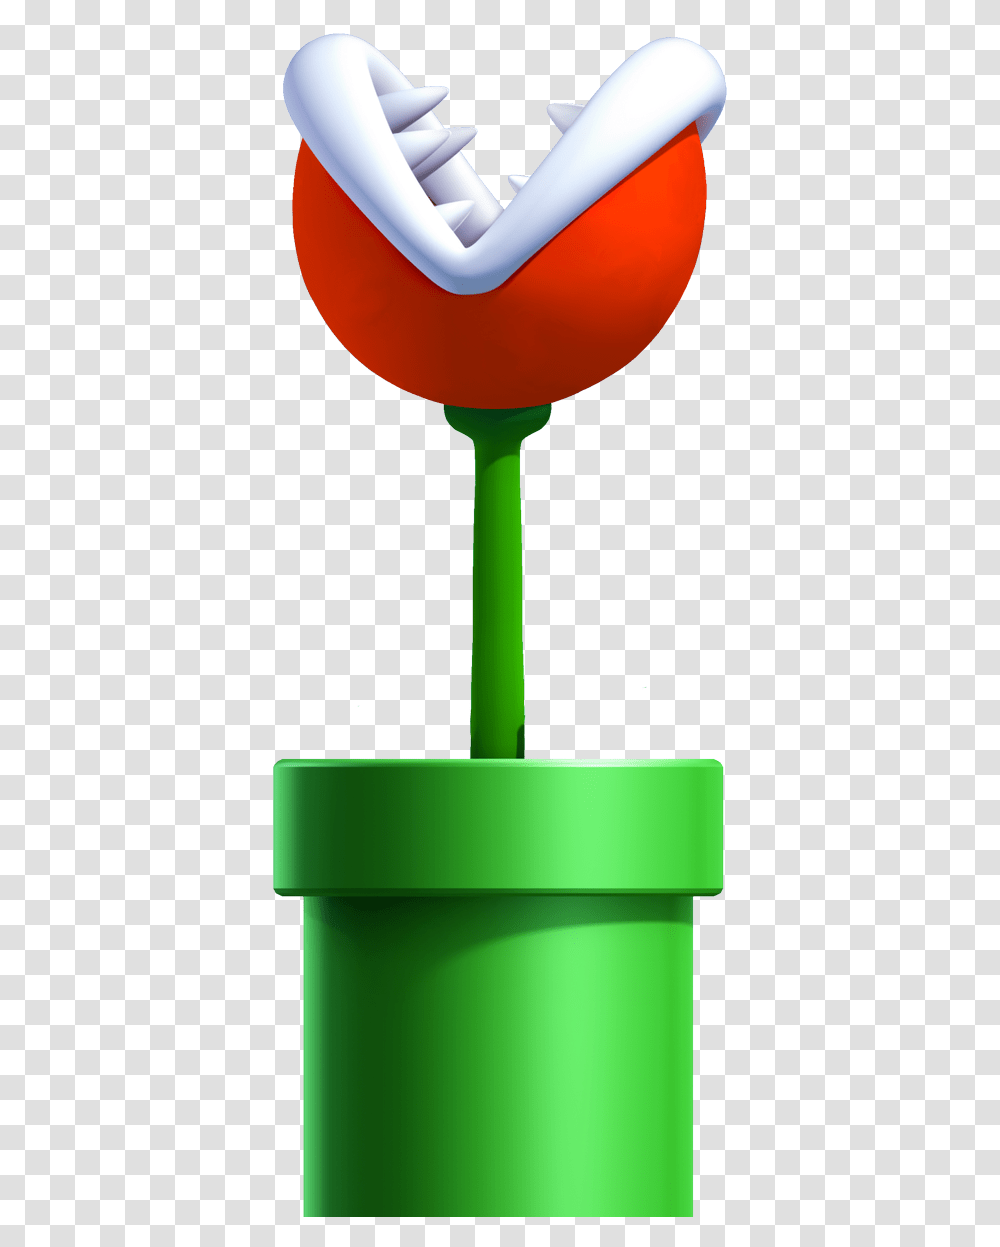 Favorite Characters No Twitter Piranha Plant Super Mario, Flower, Blossom, Lamp Transparent Png